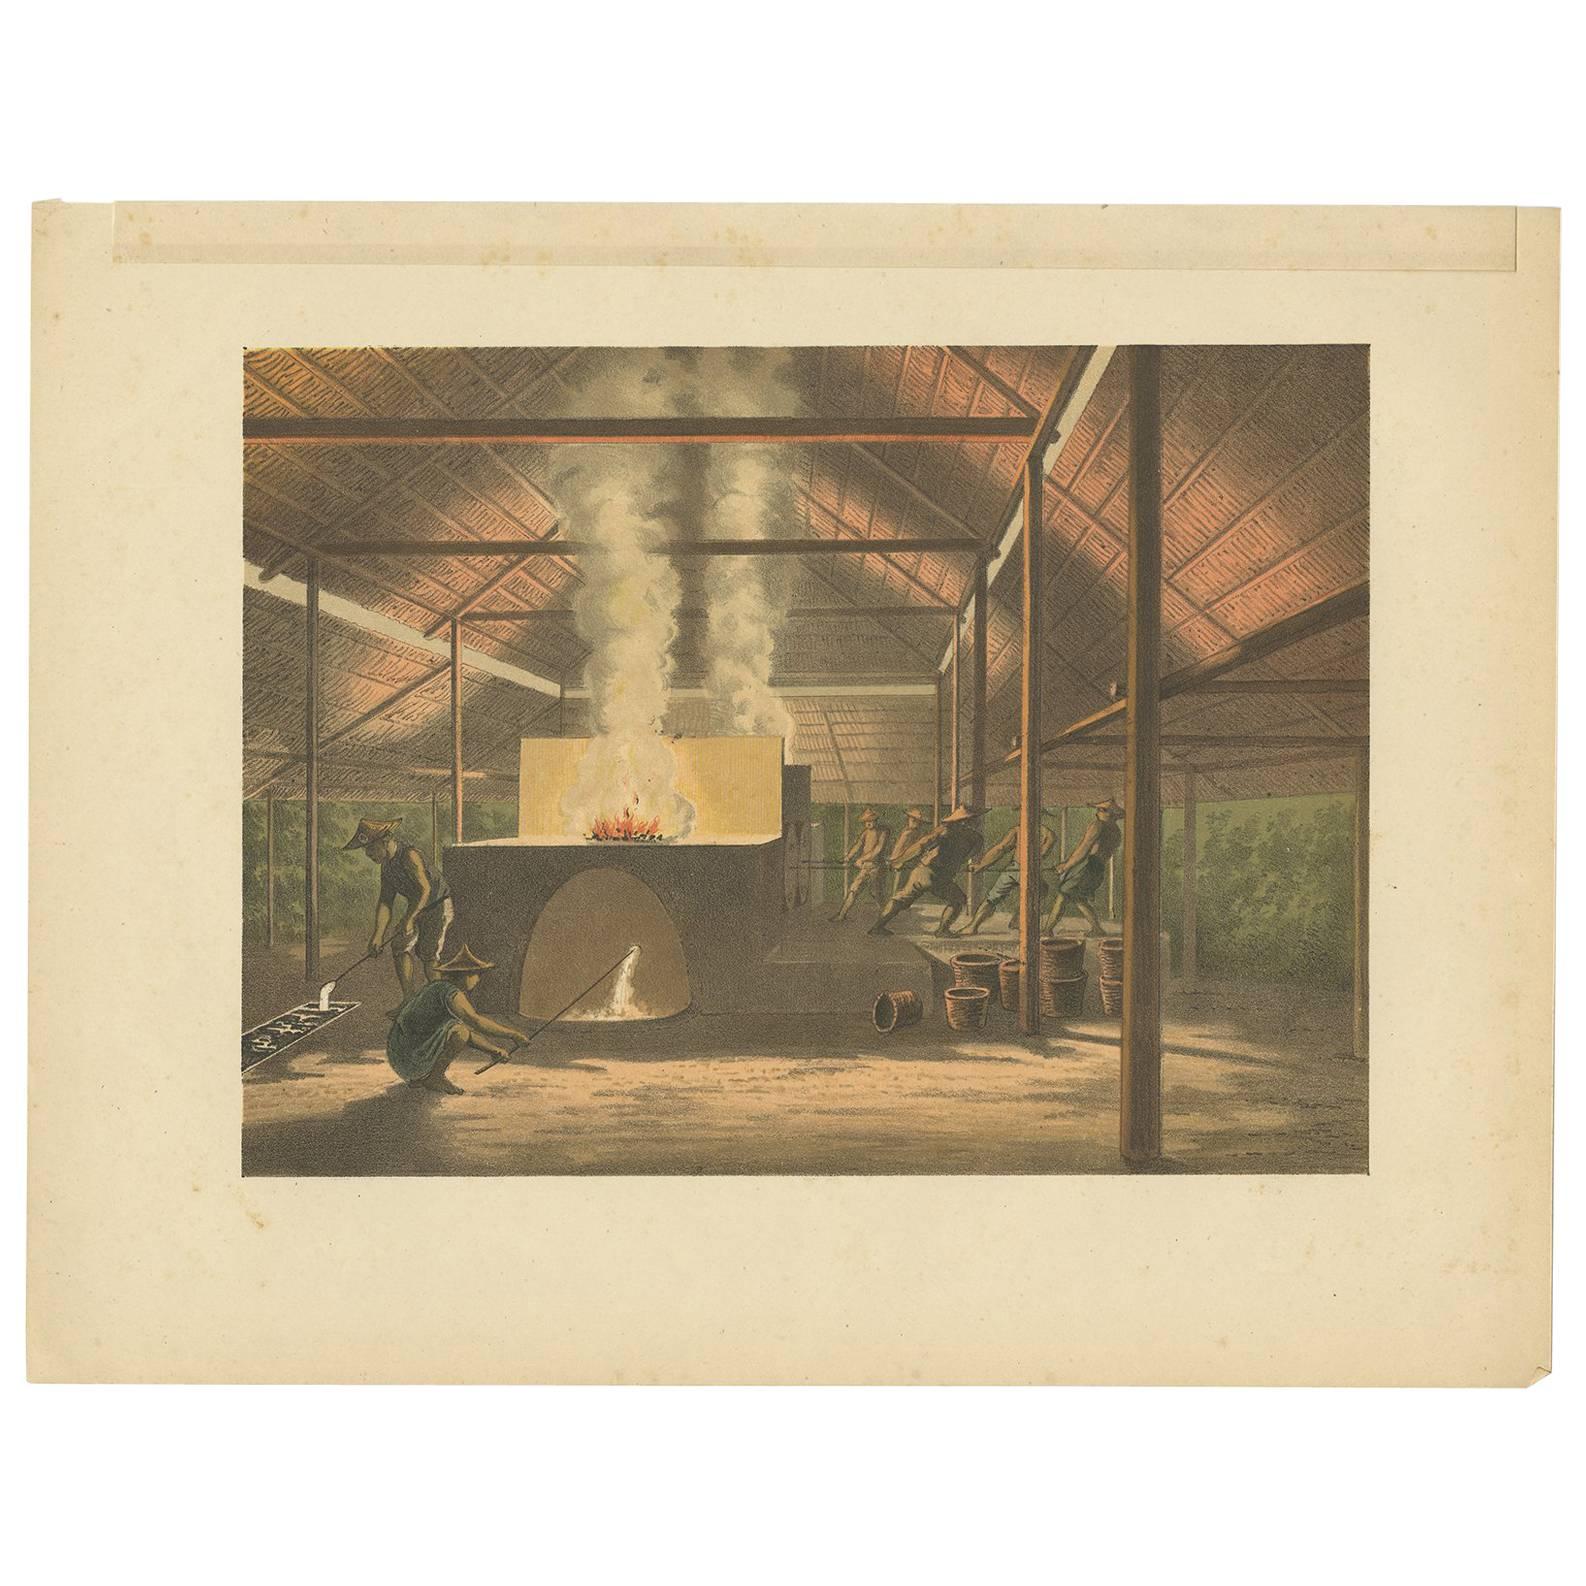 Antique Print of Tin Casting in Indonesia by M.T.H. Perelaer, 1888 For Sale